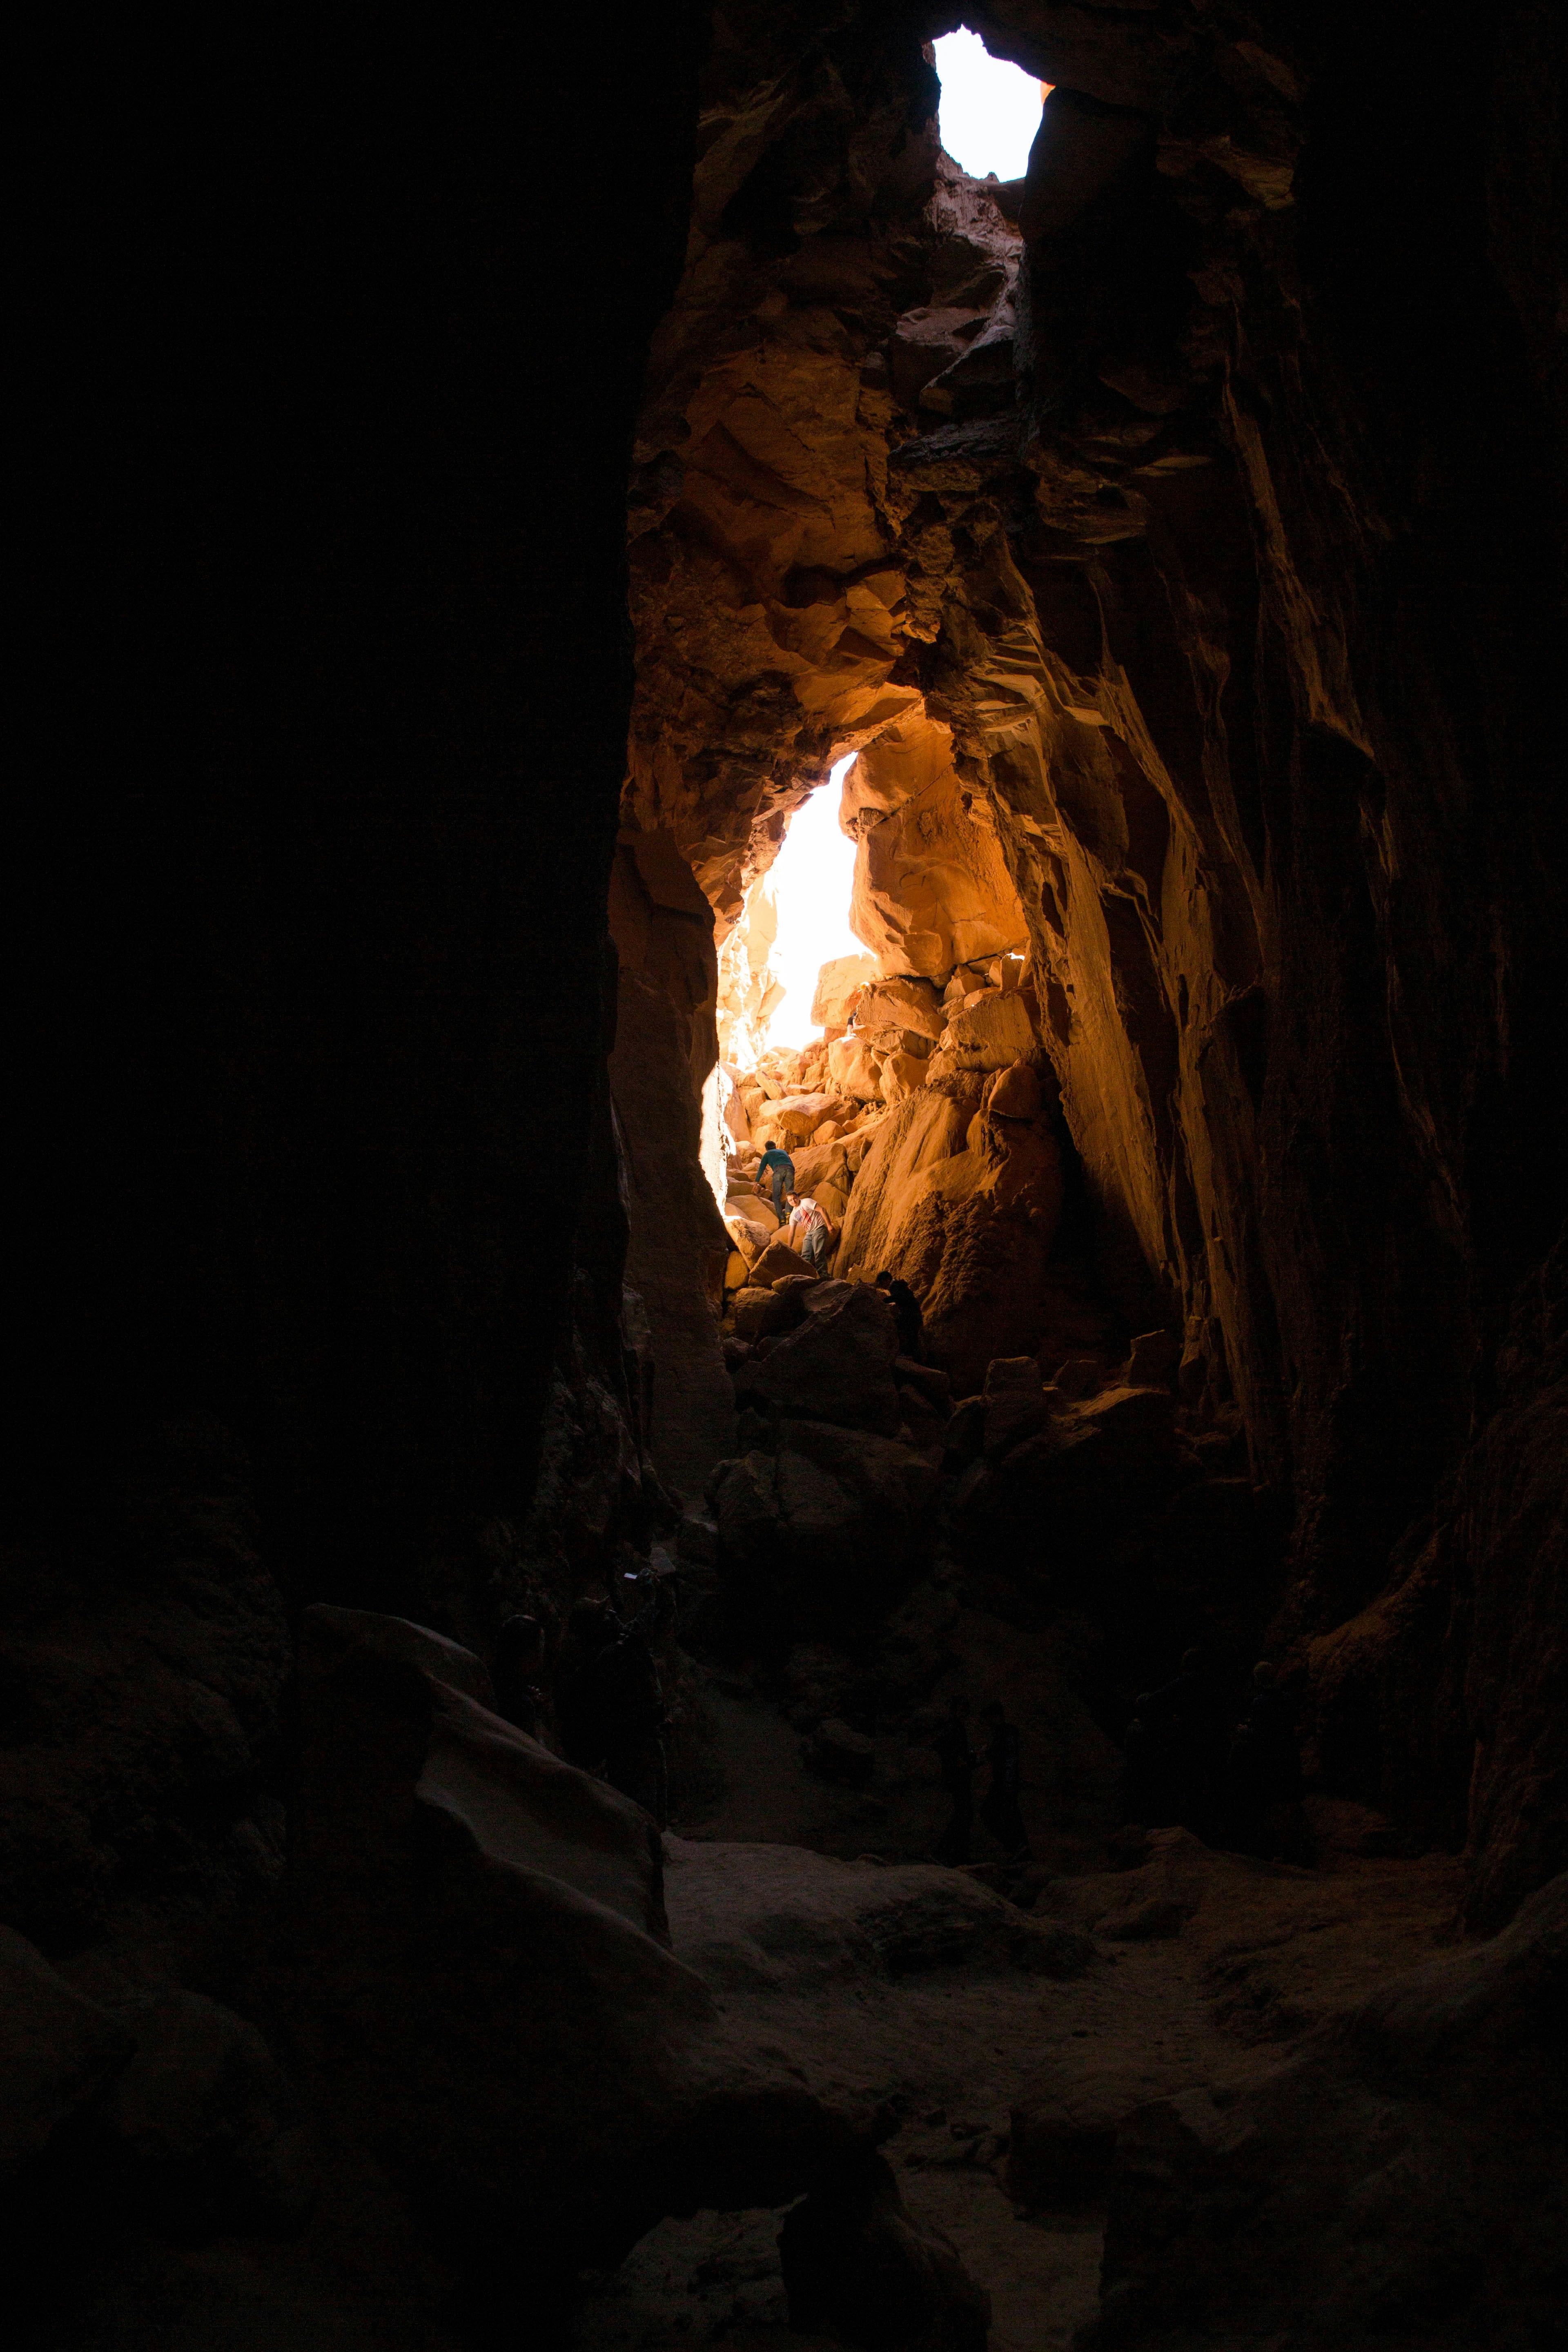 person walking inside the cave during daytime